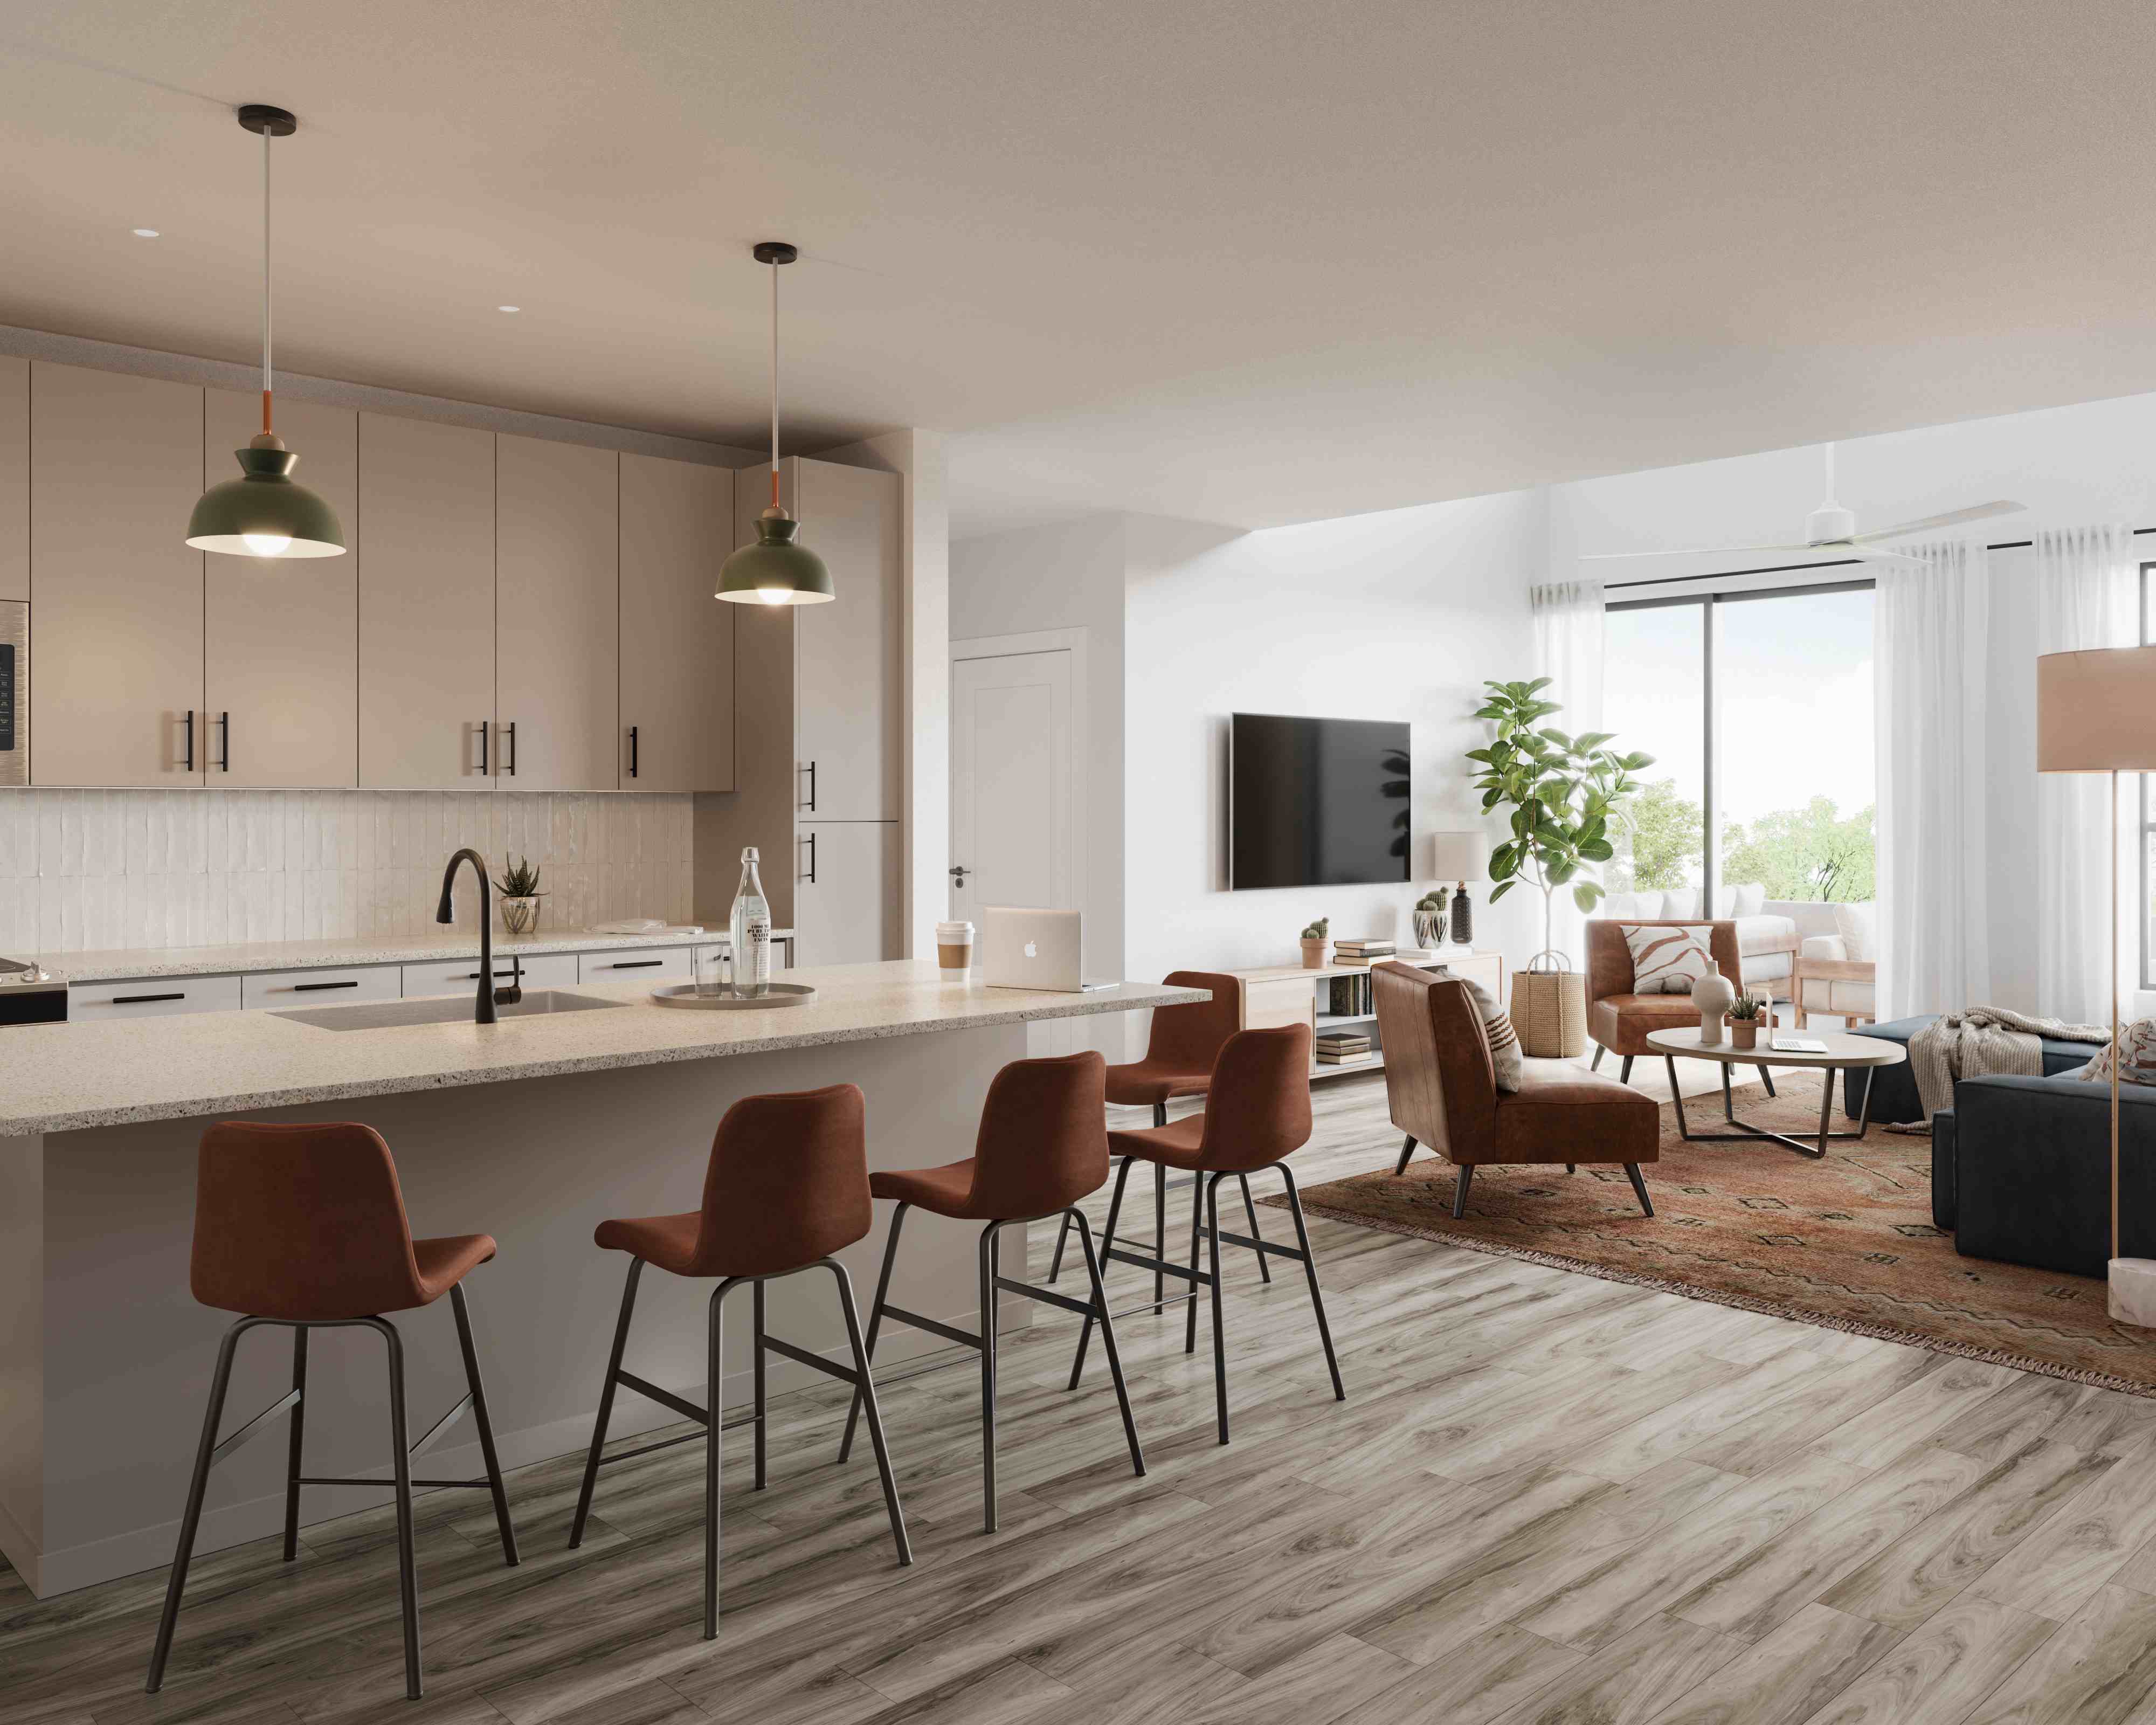 Representative rendering of The Oasis' kitchen and living area.